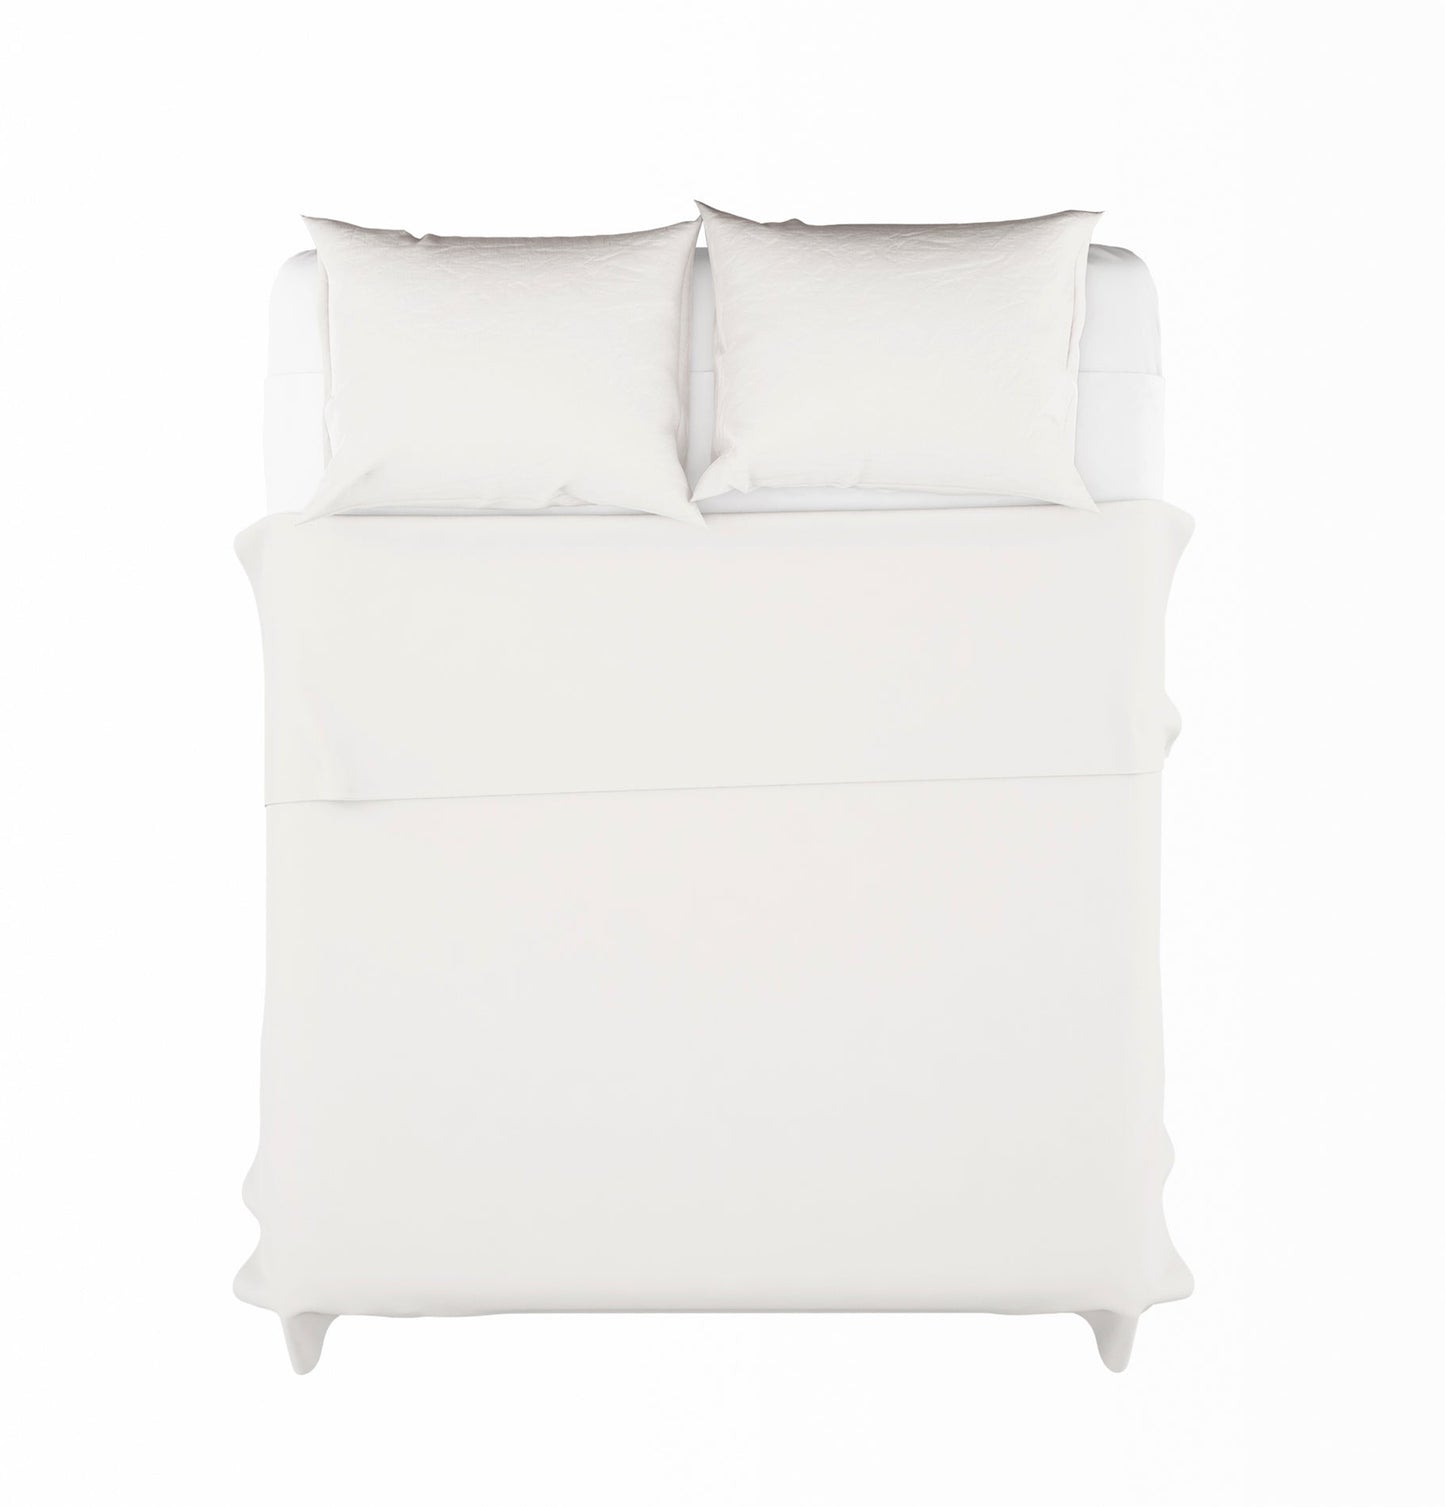 Smooth Top Sheet Percale 200h White Bed 90